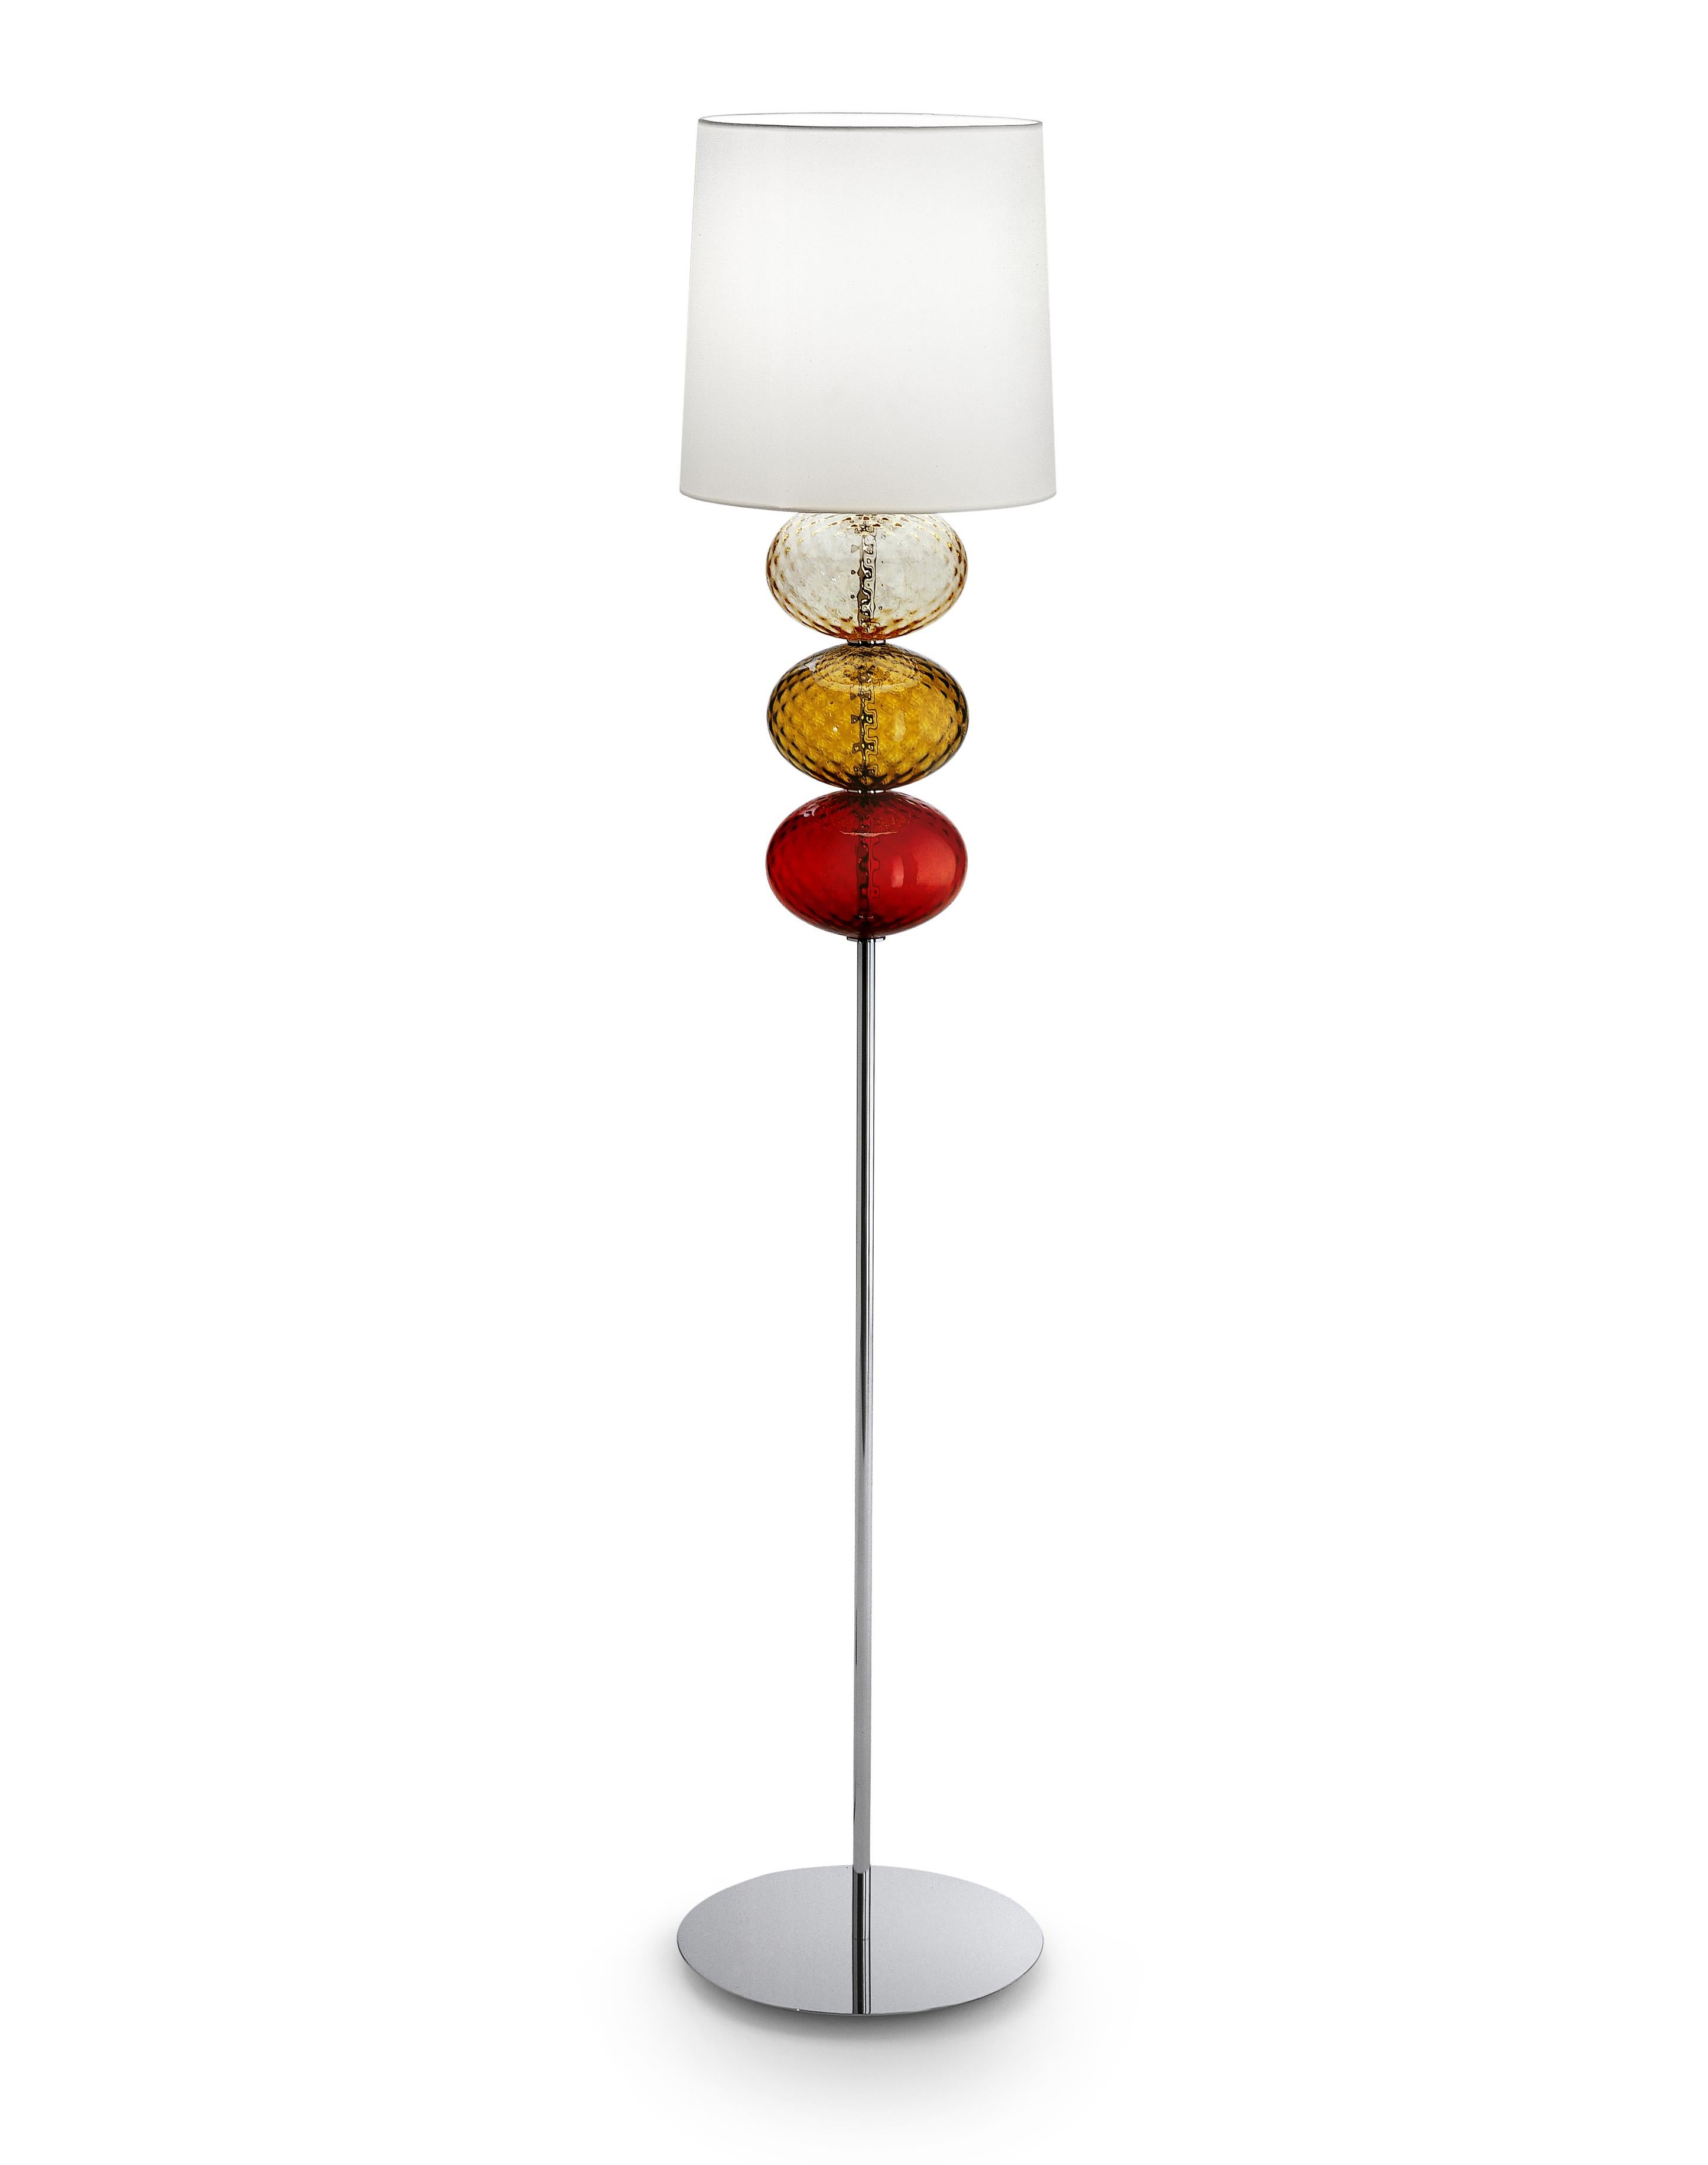 Abat Jour floor lamp with white fabric shade, chromium-plated stand and handmade blown glass elliptical elements. Its combination of white and color make it a subtle yet playful addition to any room. Also available in other colors and as a table